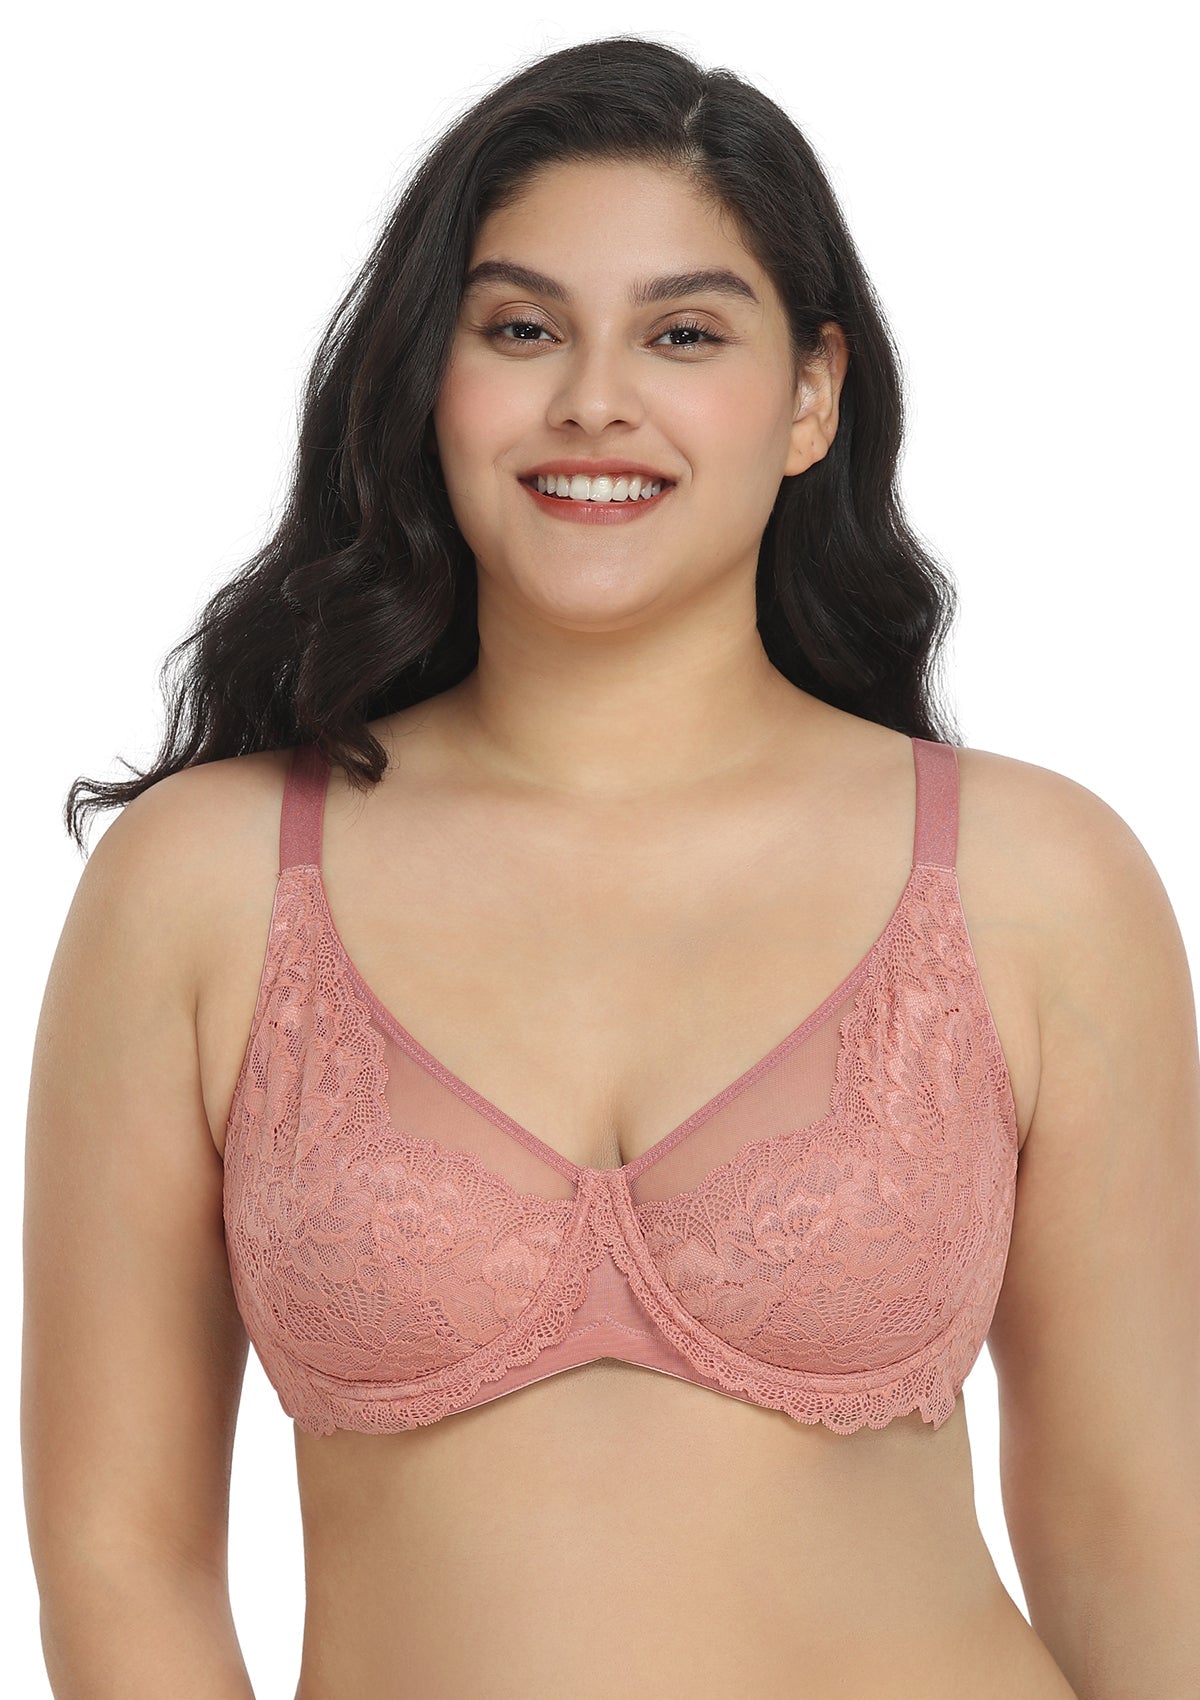 HSIA Paeonia Lace Full Coverage Underwire Non-Padded Uplifting Bra - Light Coral / 40 / D